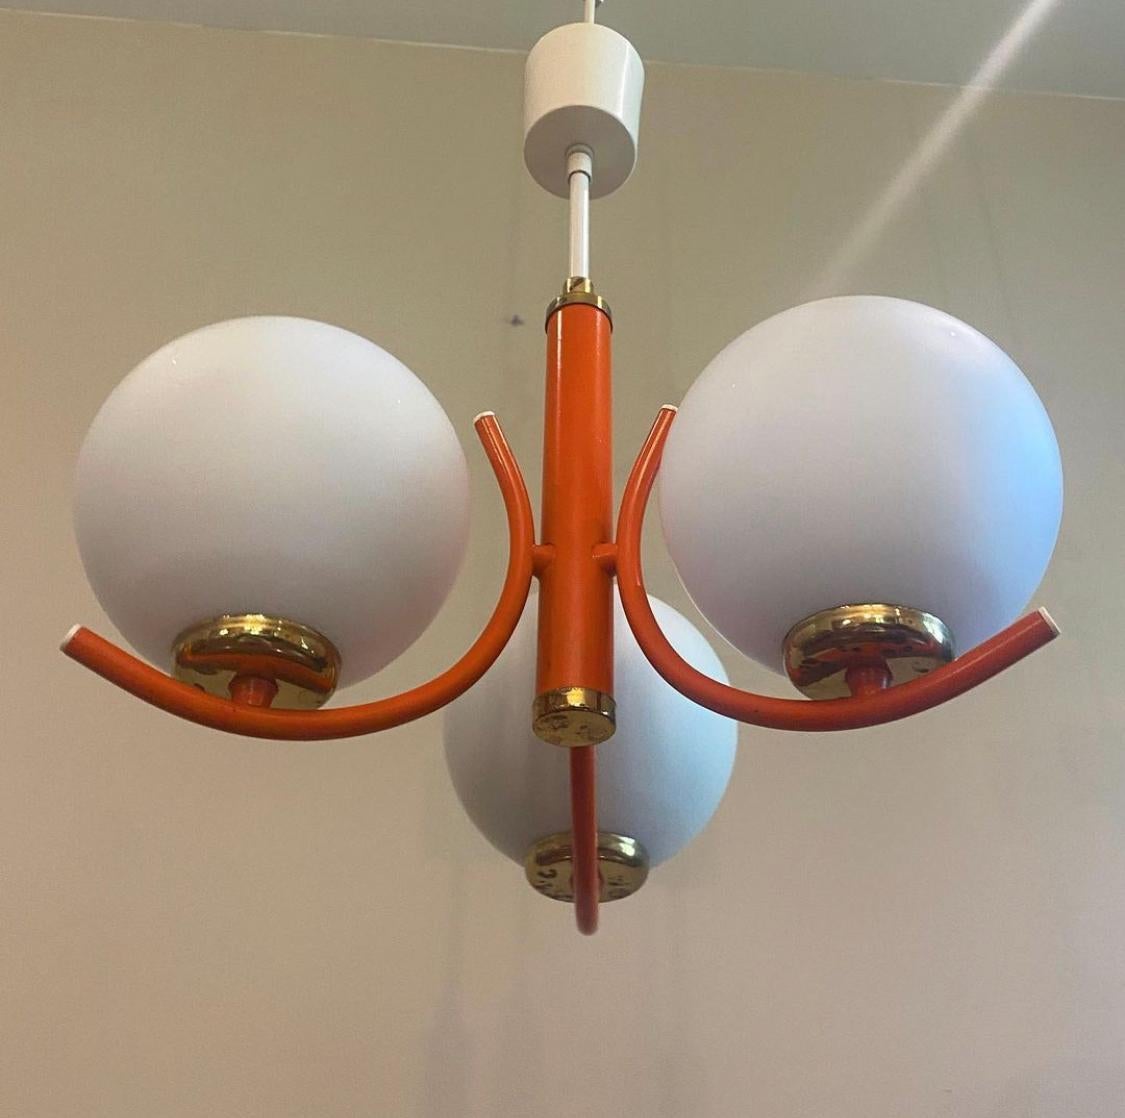 Richard Essig White Space Age Chandelier, circa 1970s

An extremely rare and sought after Richard Essig chandelier made in Germany in the 1970s. It is fascinating with its elegant design. Three opaque glass balls which screw onto the metal body.